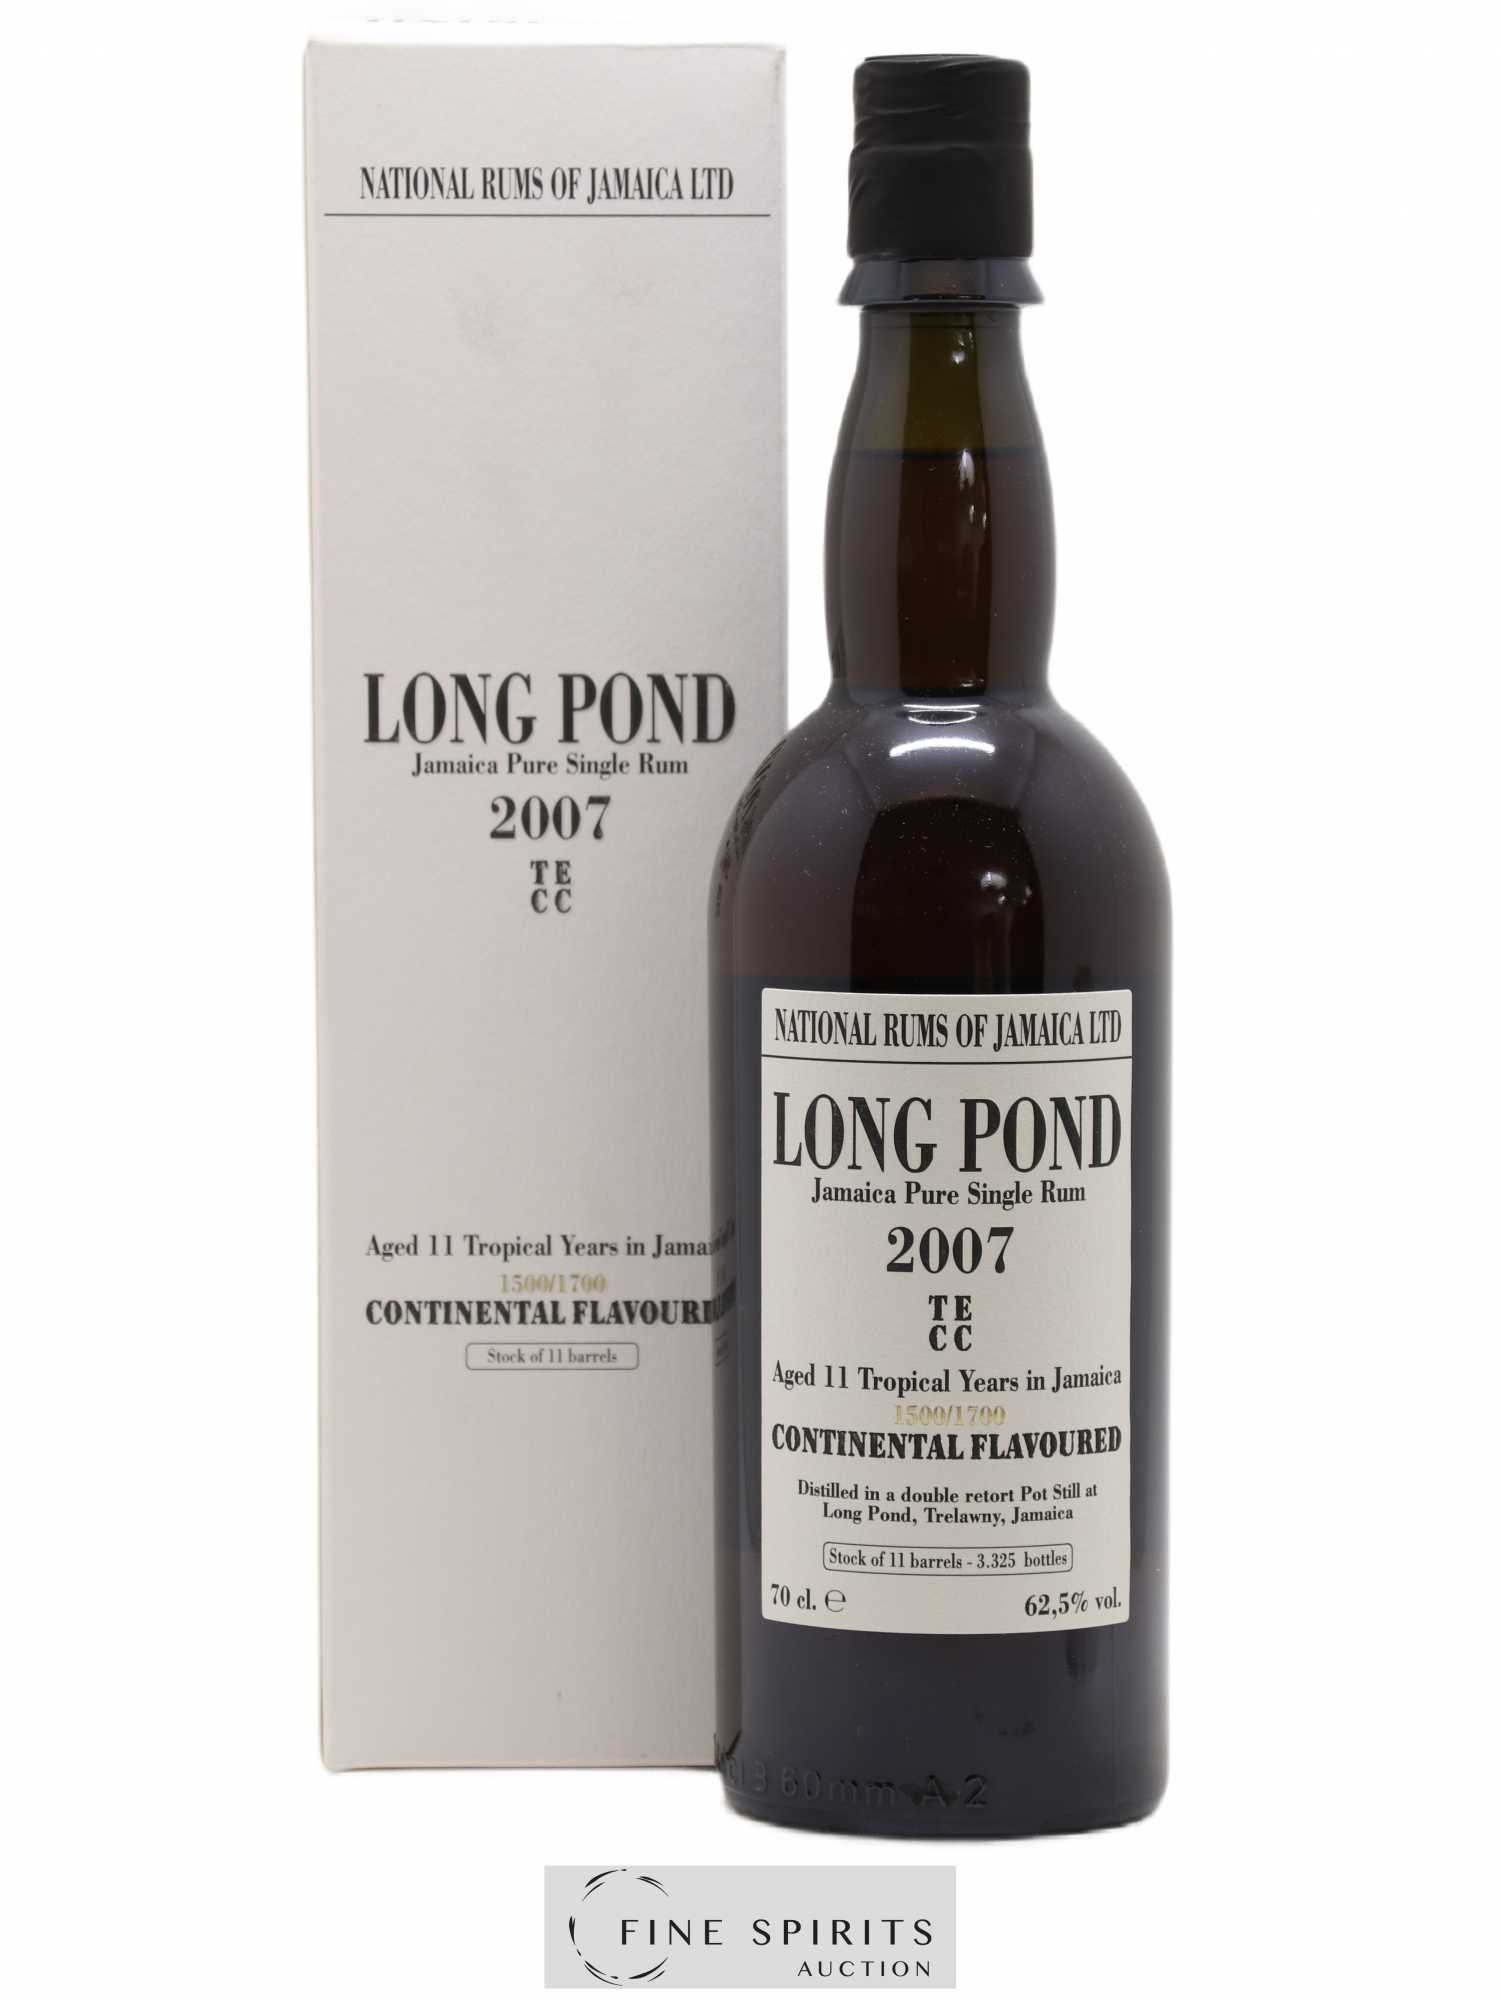 Long Pond 11 years 2007 Of. 15001700 Mark TECC - One of 3325 - bottled 2018 LM&V National Rums of Jamaica 